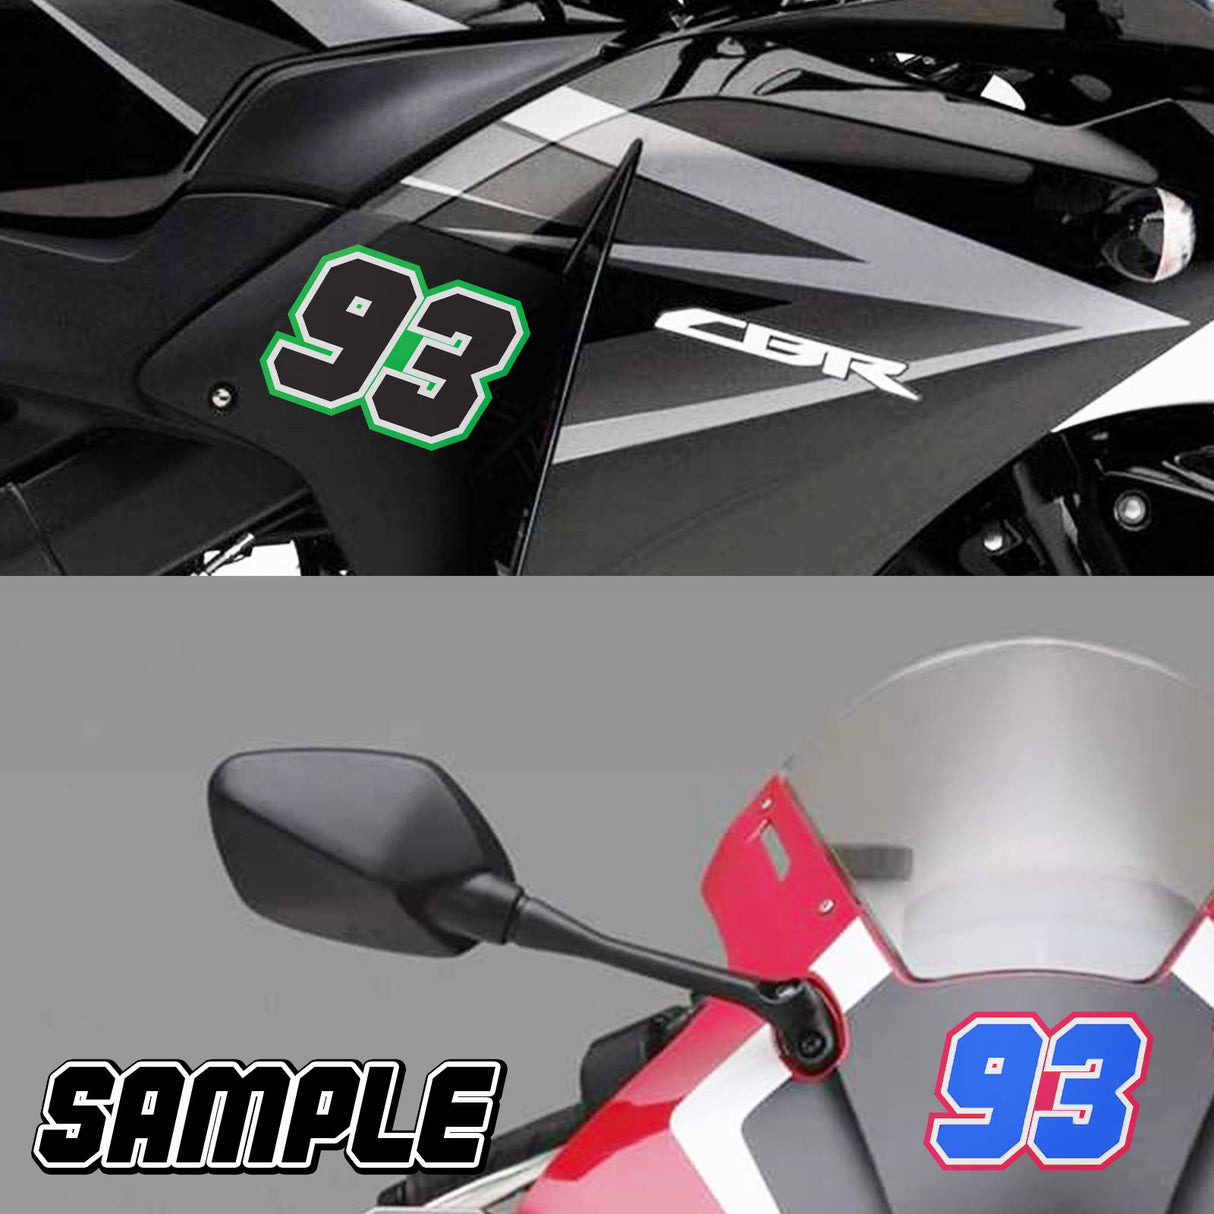 [Do It Your Way] Personal Custom Race Number Plate Stickers Decals Graphics 3 pcs Commamdo - StickerBao Wheel Sticker Store